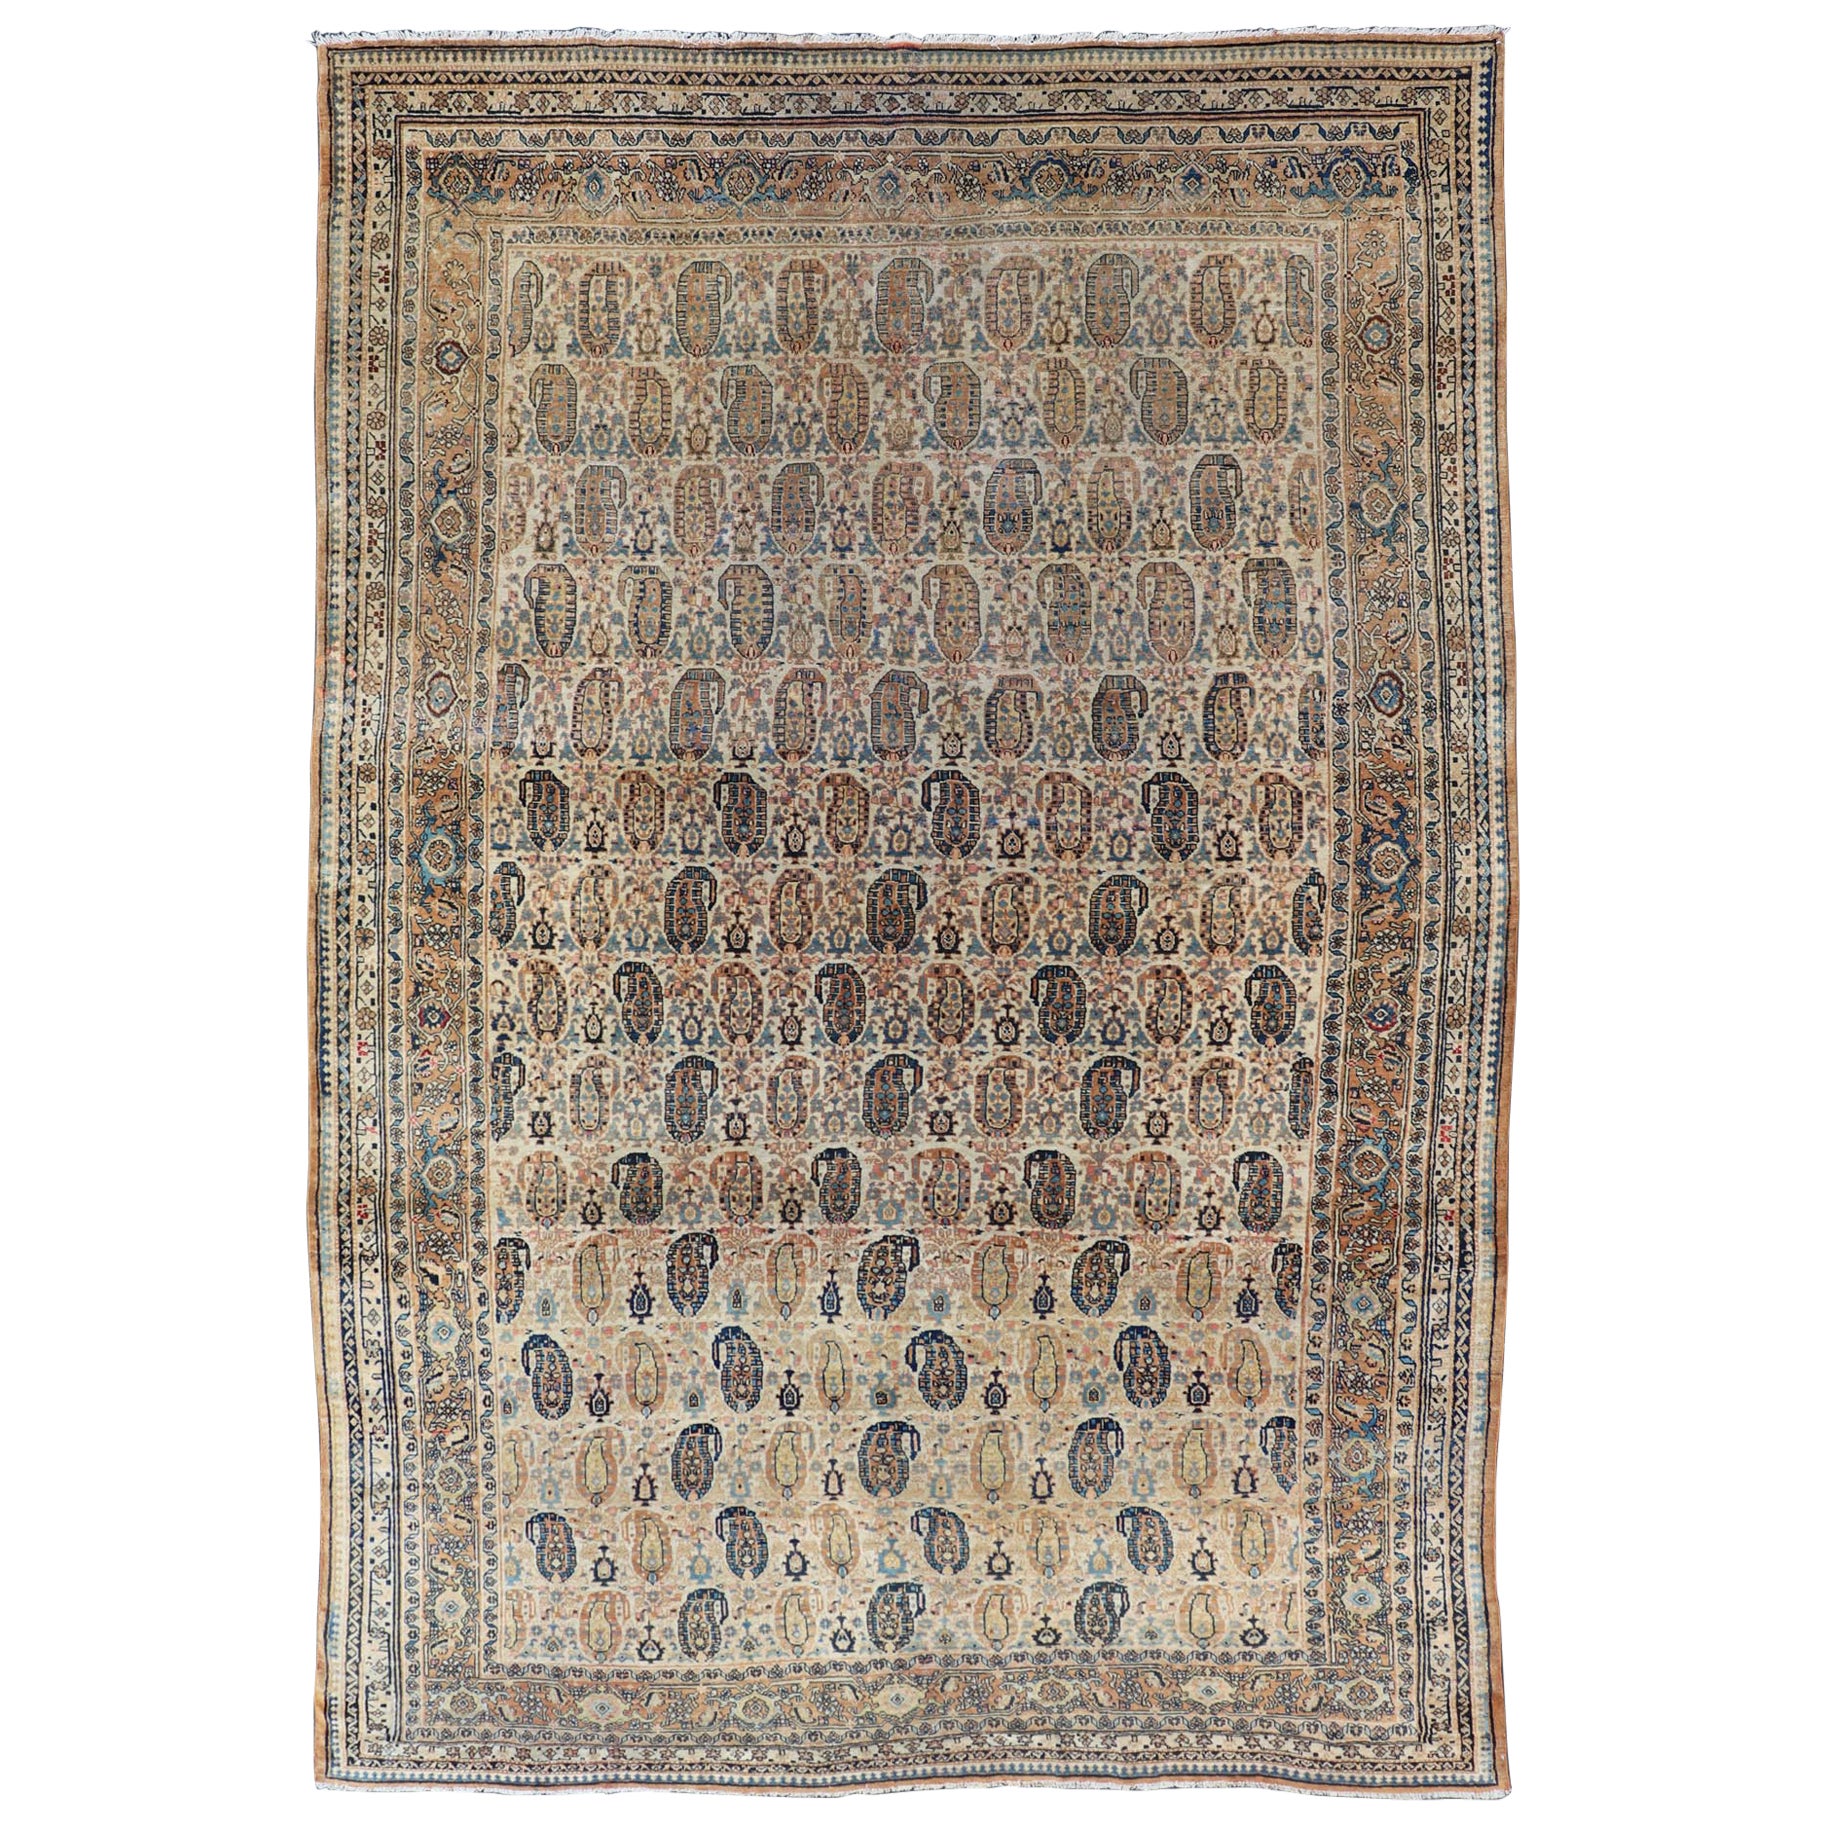 Antique Feraghan Persian Rug in Cream Color Background with Paisley Design For Sale